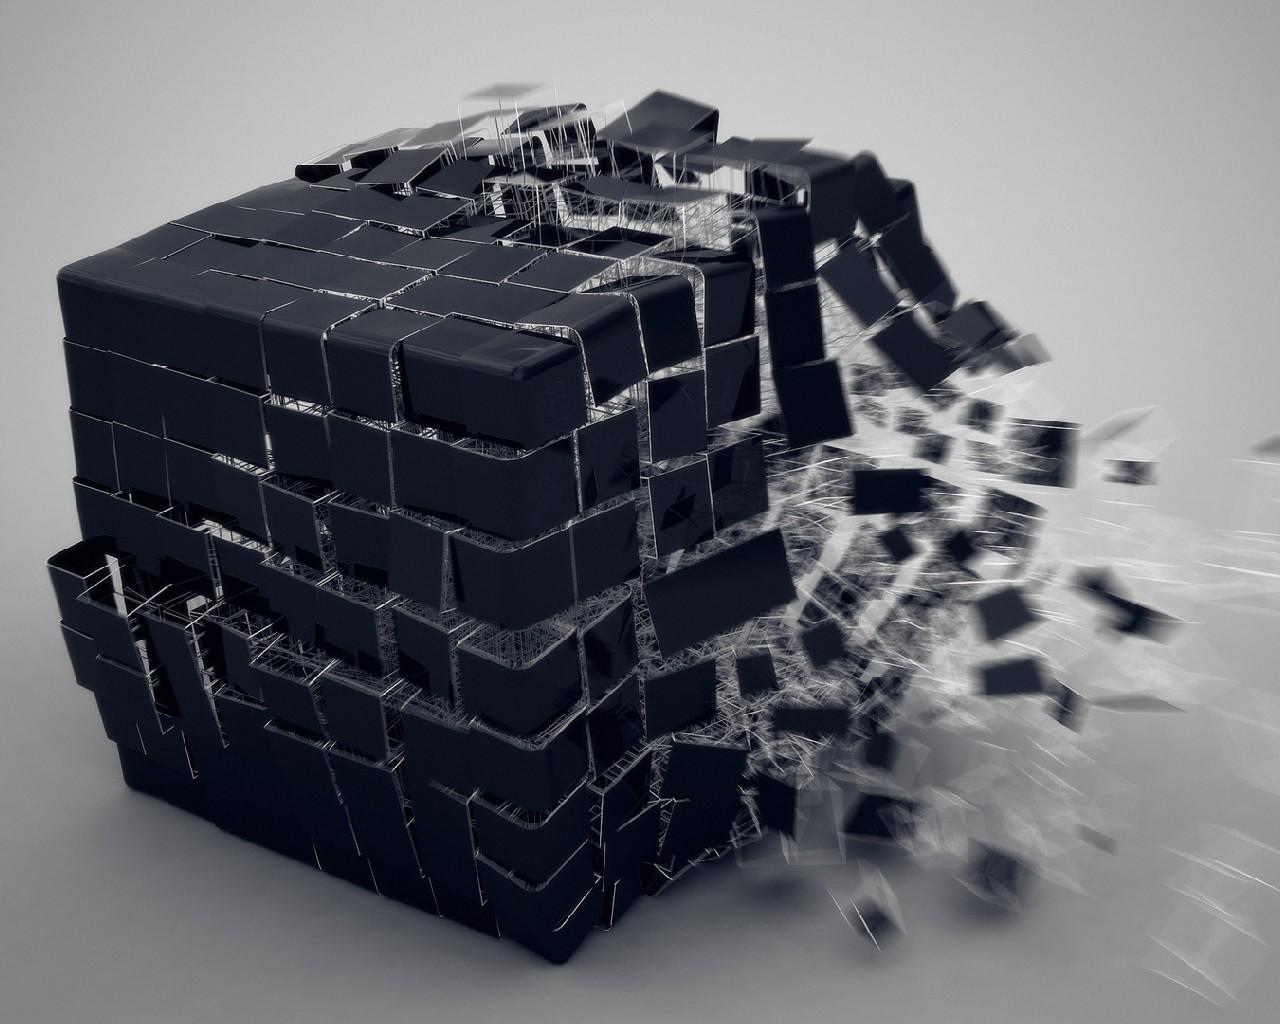 3D Cube Photo Live Wallpaper for Android - APK Download